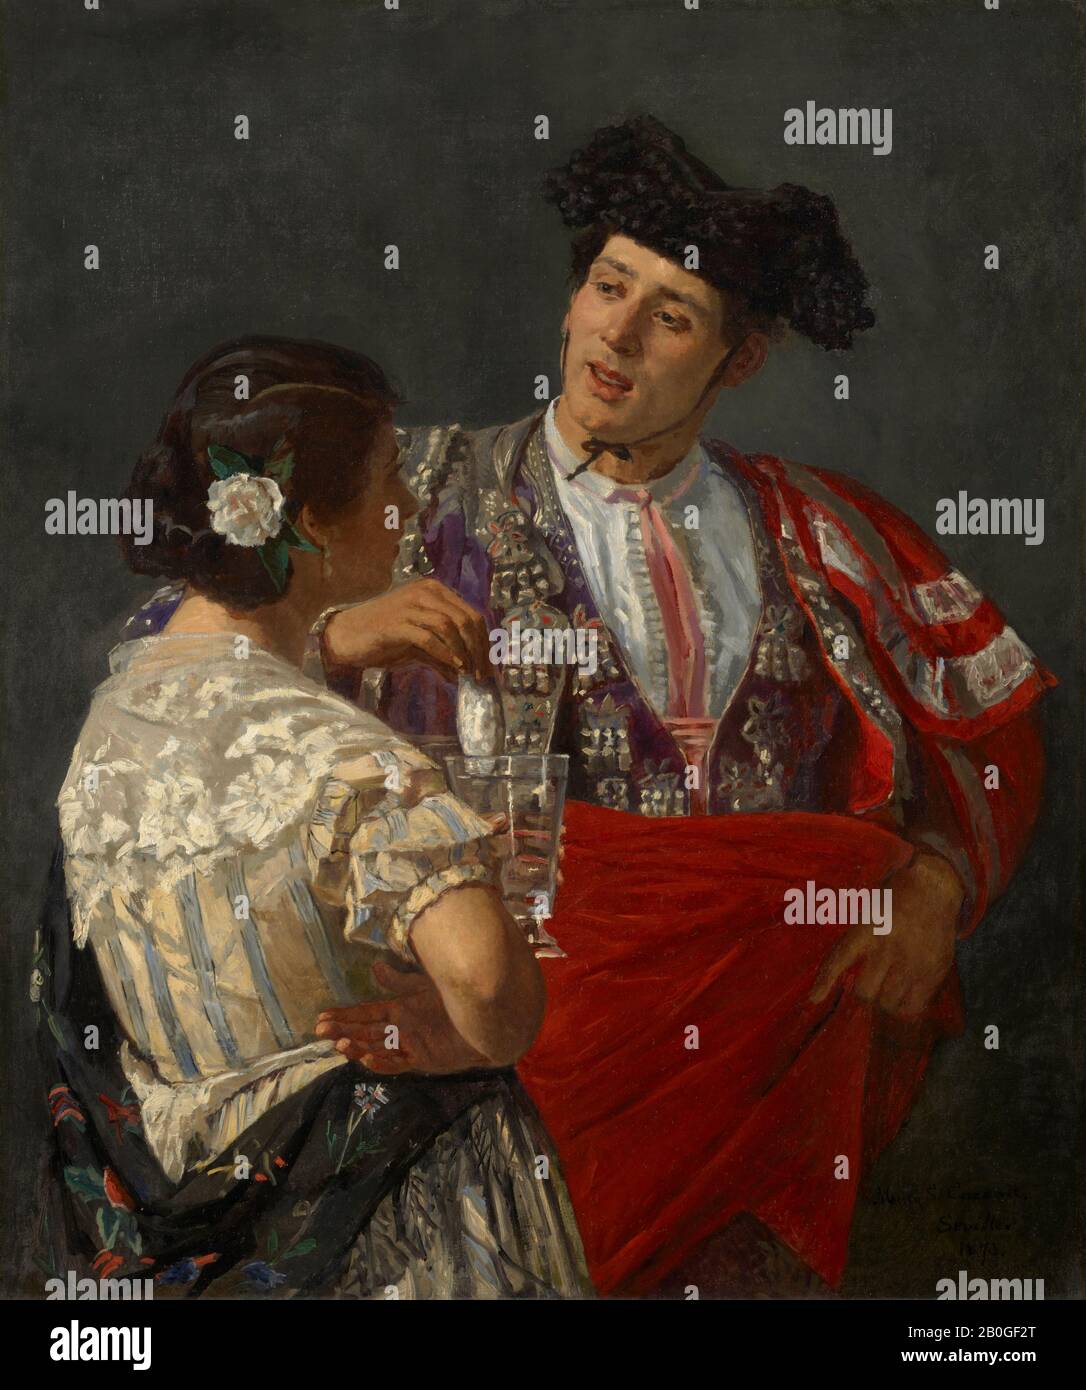 Mary Cassatt, American (active in France), 1844–1926, Offering the Panal to the Bullfighter, 1873, Oil on canvas, 39 5/8 x 33 1/2 in. (100.6 x 85.1 cm Stock Photo